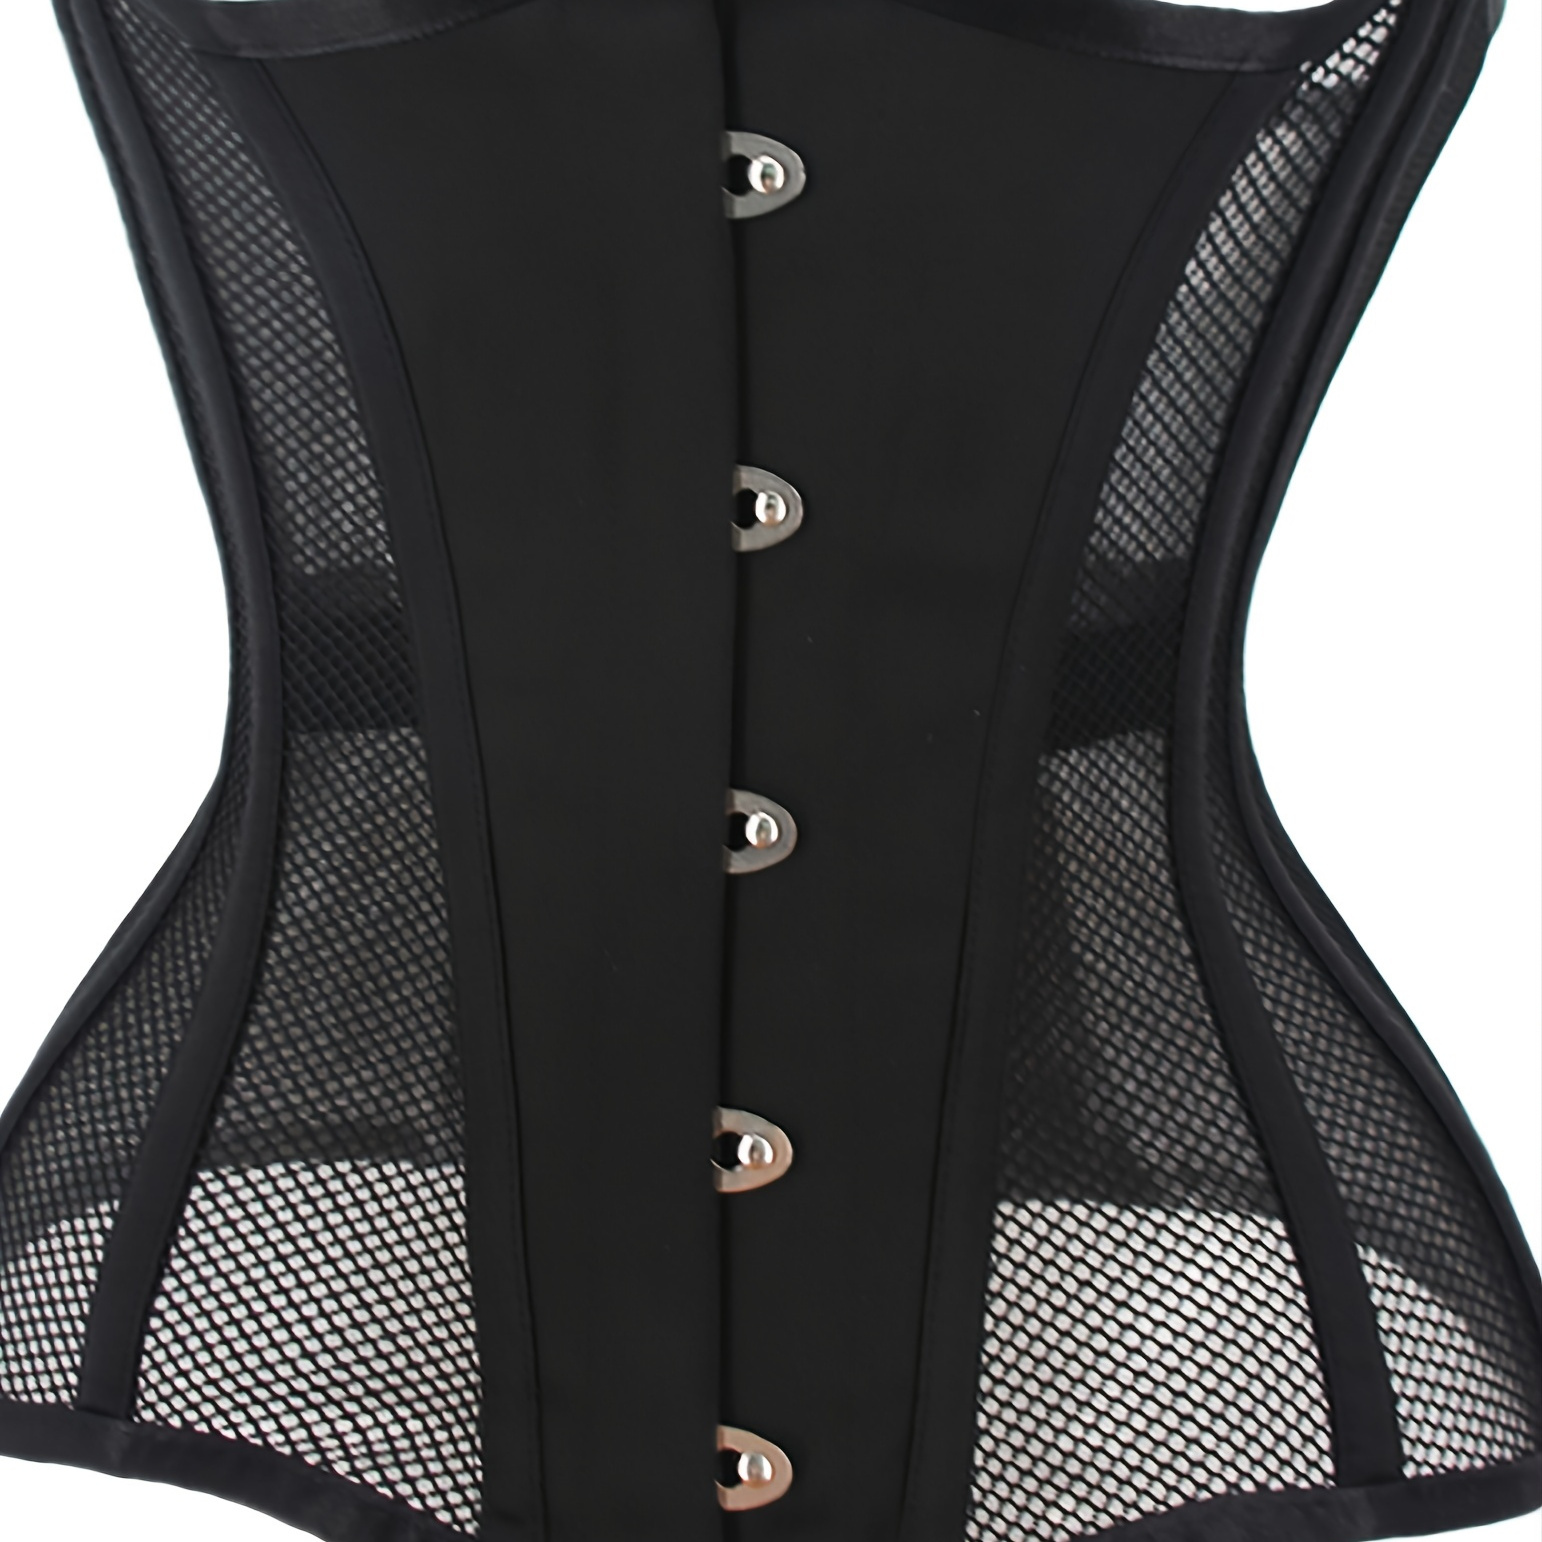 BrilliantMe Women's Push Up Corsets Strapless Lace Up Bustiers Shapewear  Waist Trainer Black S 